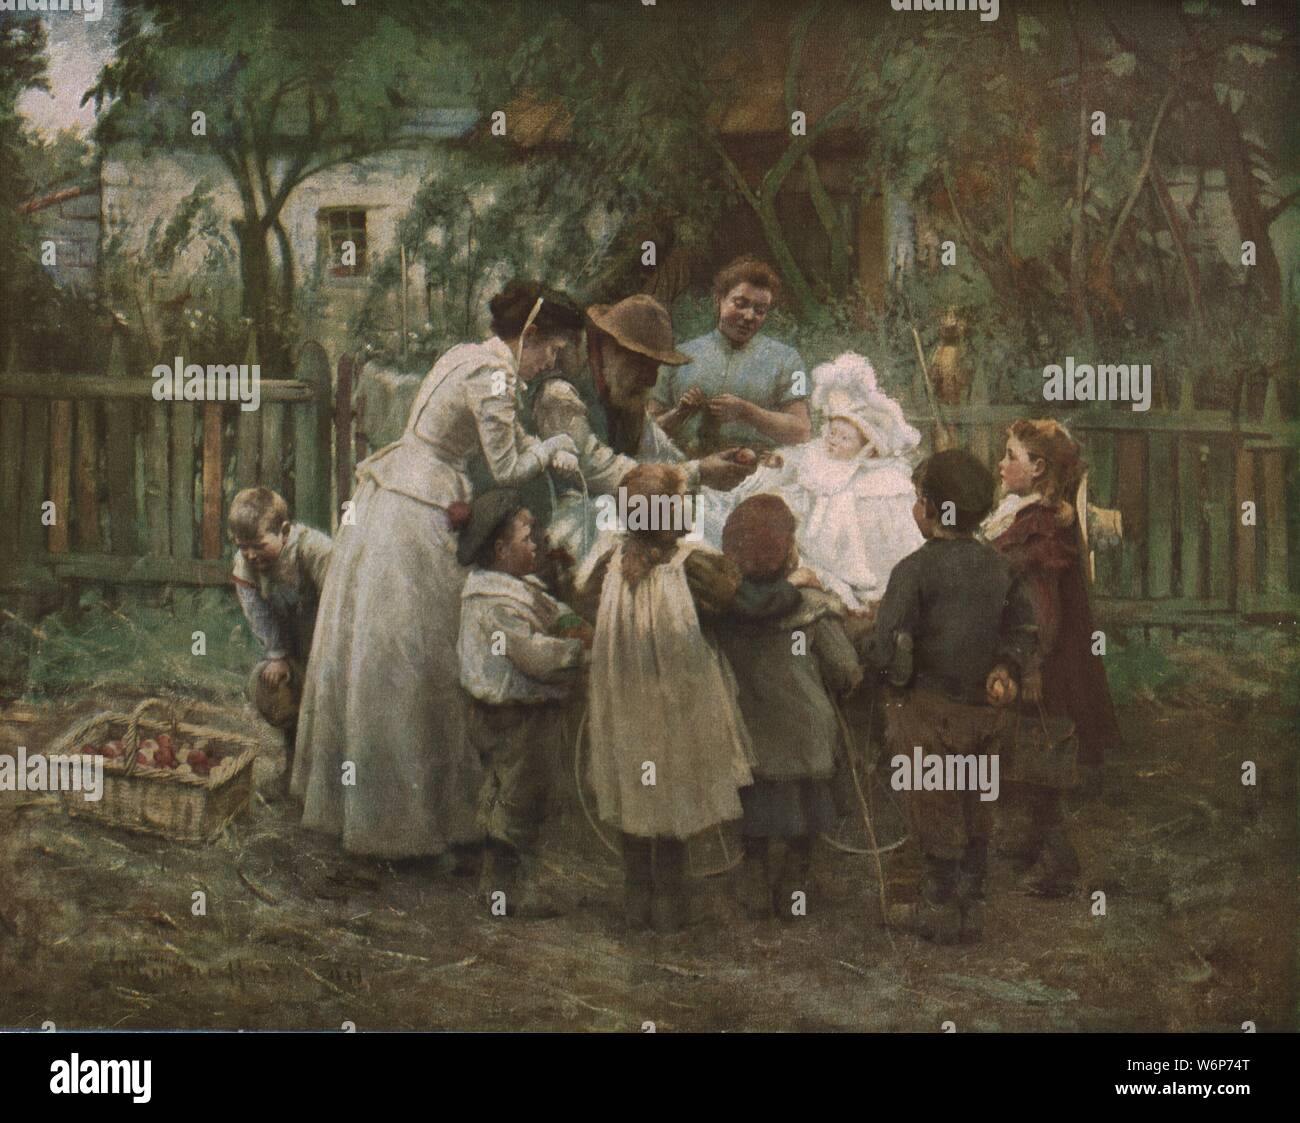 'The Young Laird', c1900, (c1930). A group of Scottish estate workers crowd round to admire their landlord's young son, who is dressed in an elaborate white outfit. An elderly man offers the child an apple, as a hungry boy eyes the basket. Painting in the Gallery Oldham, Greater Manchester. From &quot;Modern Masterpieces of British Art&quot;. [The Amalgamated Press Ltd., London, c1930] Stock Photo